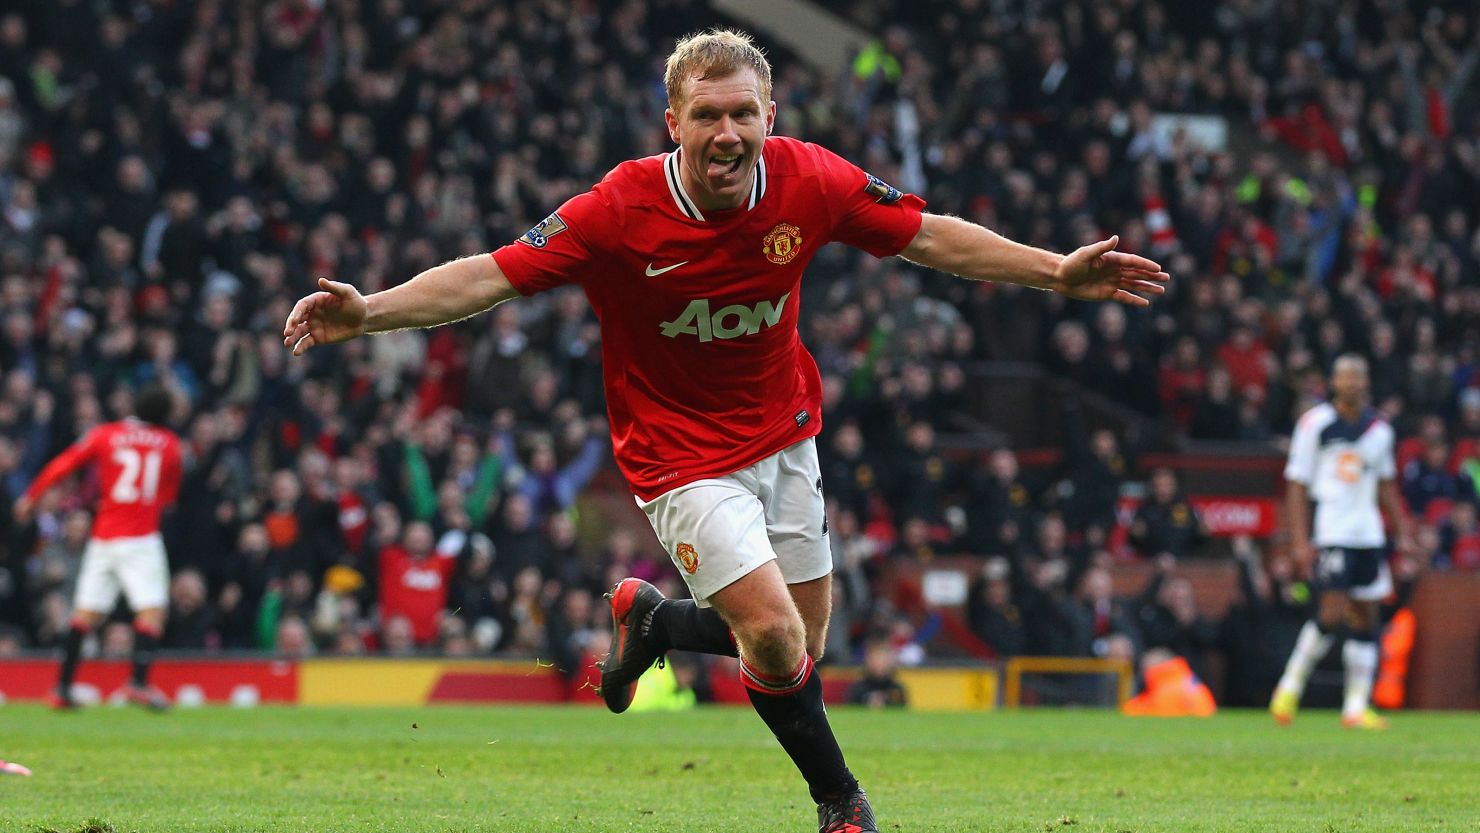 Paul Scholes celebrates his return to the English Premier League with a goal against Bolton Wanderers